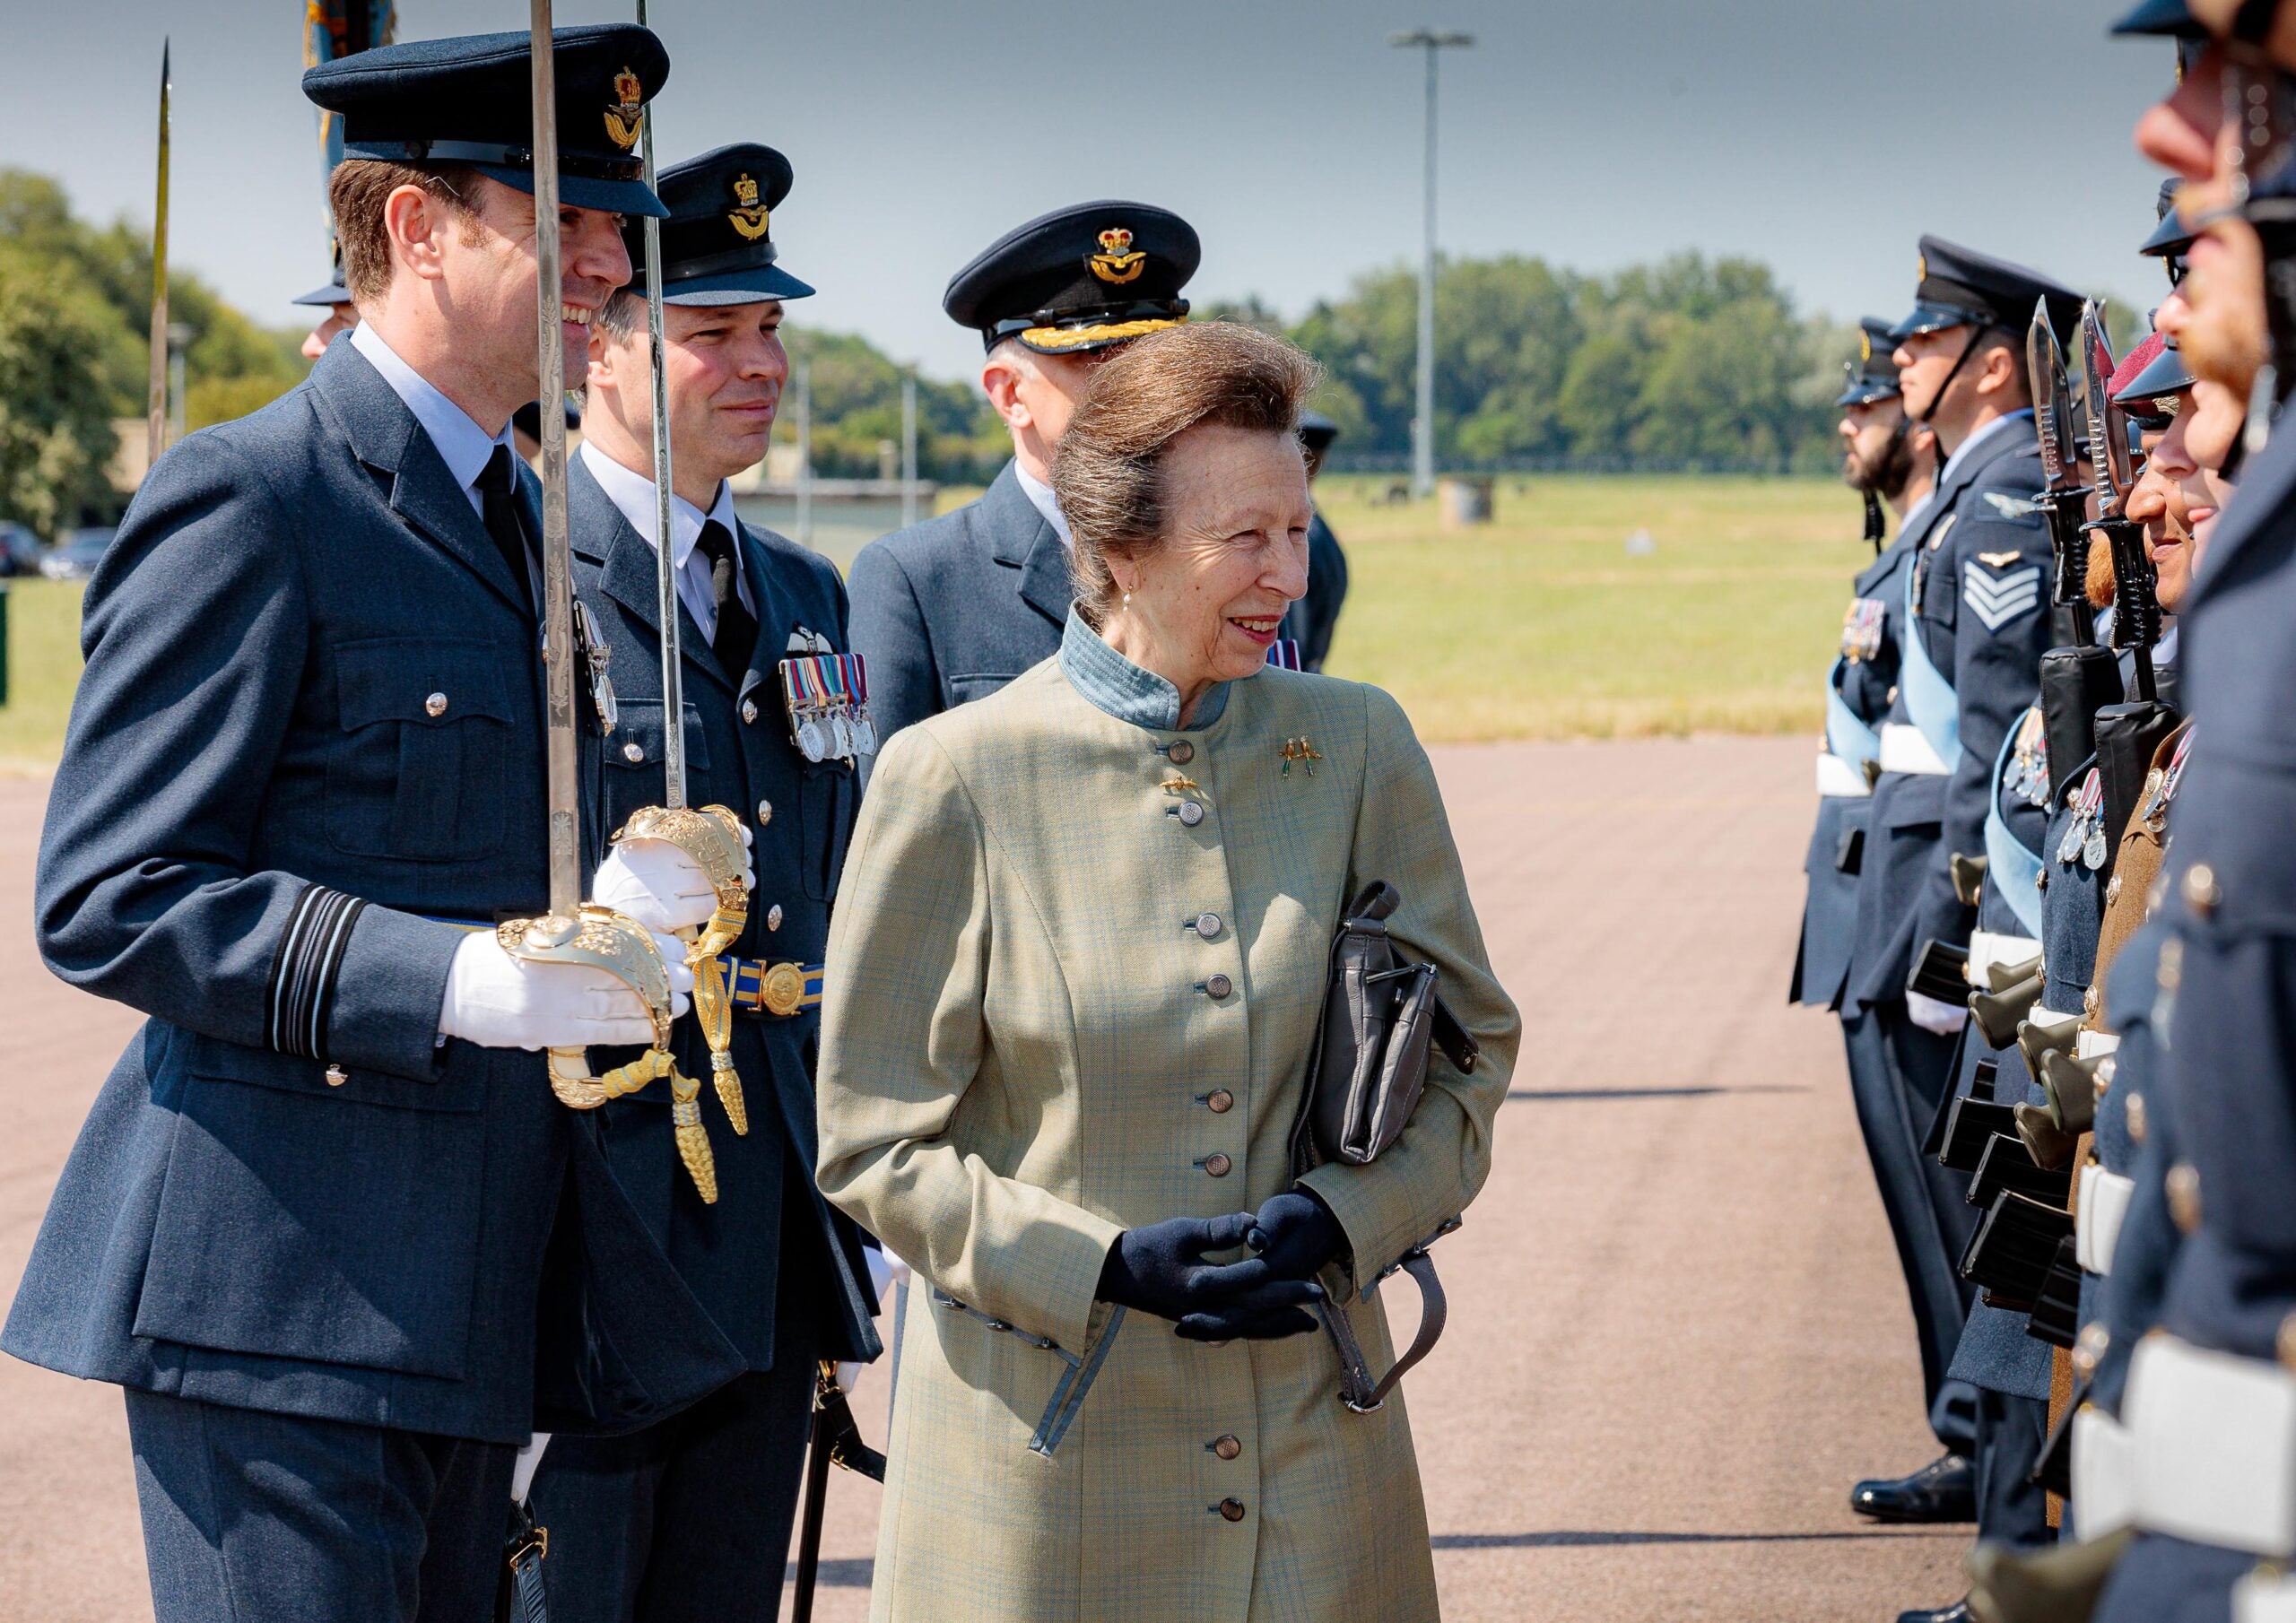 The end of 57 years of the Hercules in RAF service, and 107 years of 47 Squadron history. A Royal Parade was held at RAF Brize Norton to mark the achievements of 47 Squadron while also laying-up the Squadron Standard for a period at College Hall Officers’ Mess, RAFC Cranwell.
The parade consisted of 2 x Flights of ORs escorting the Standard of 47 Sqn and a flypast of a C130 during the Parade. The Band of the Royal Air Force provided musical support. The parade was followed by a reception for invited VIPs to meet with Service Personnel and their families.
RAF Brize Norton Station Commander, Gp Capt Claire O’Grady and Commander Air Wing, Gp Capt Gareth Burdett.
ProjO Flt Lt Harry Lane Tel: 01993 896834
email Harrison.lane101@mod.gov.uk.